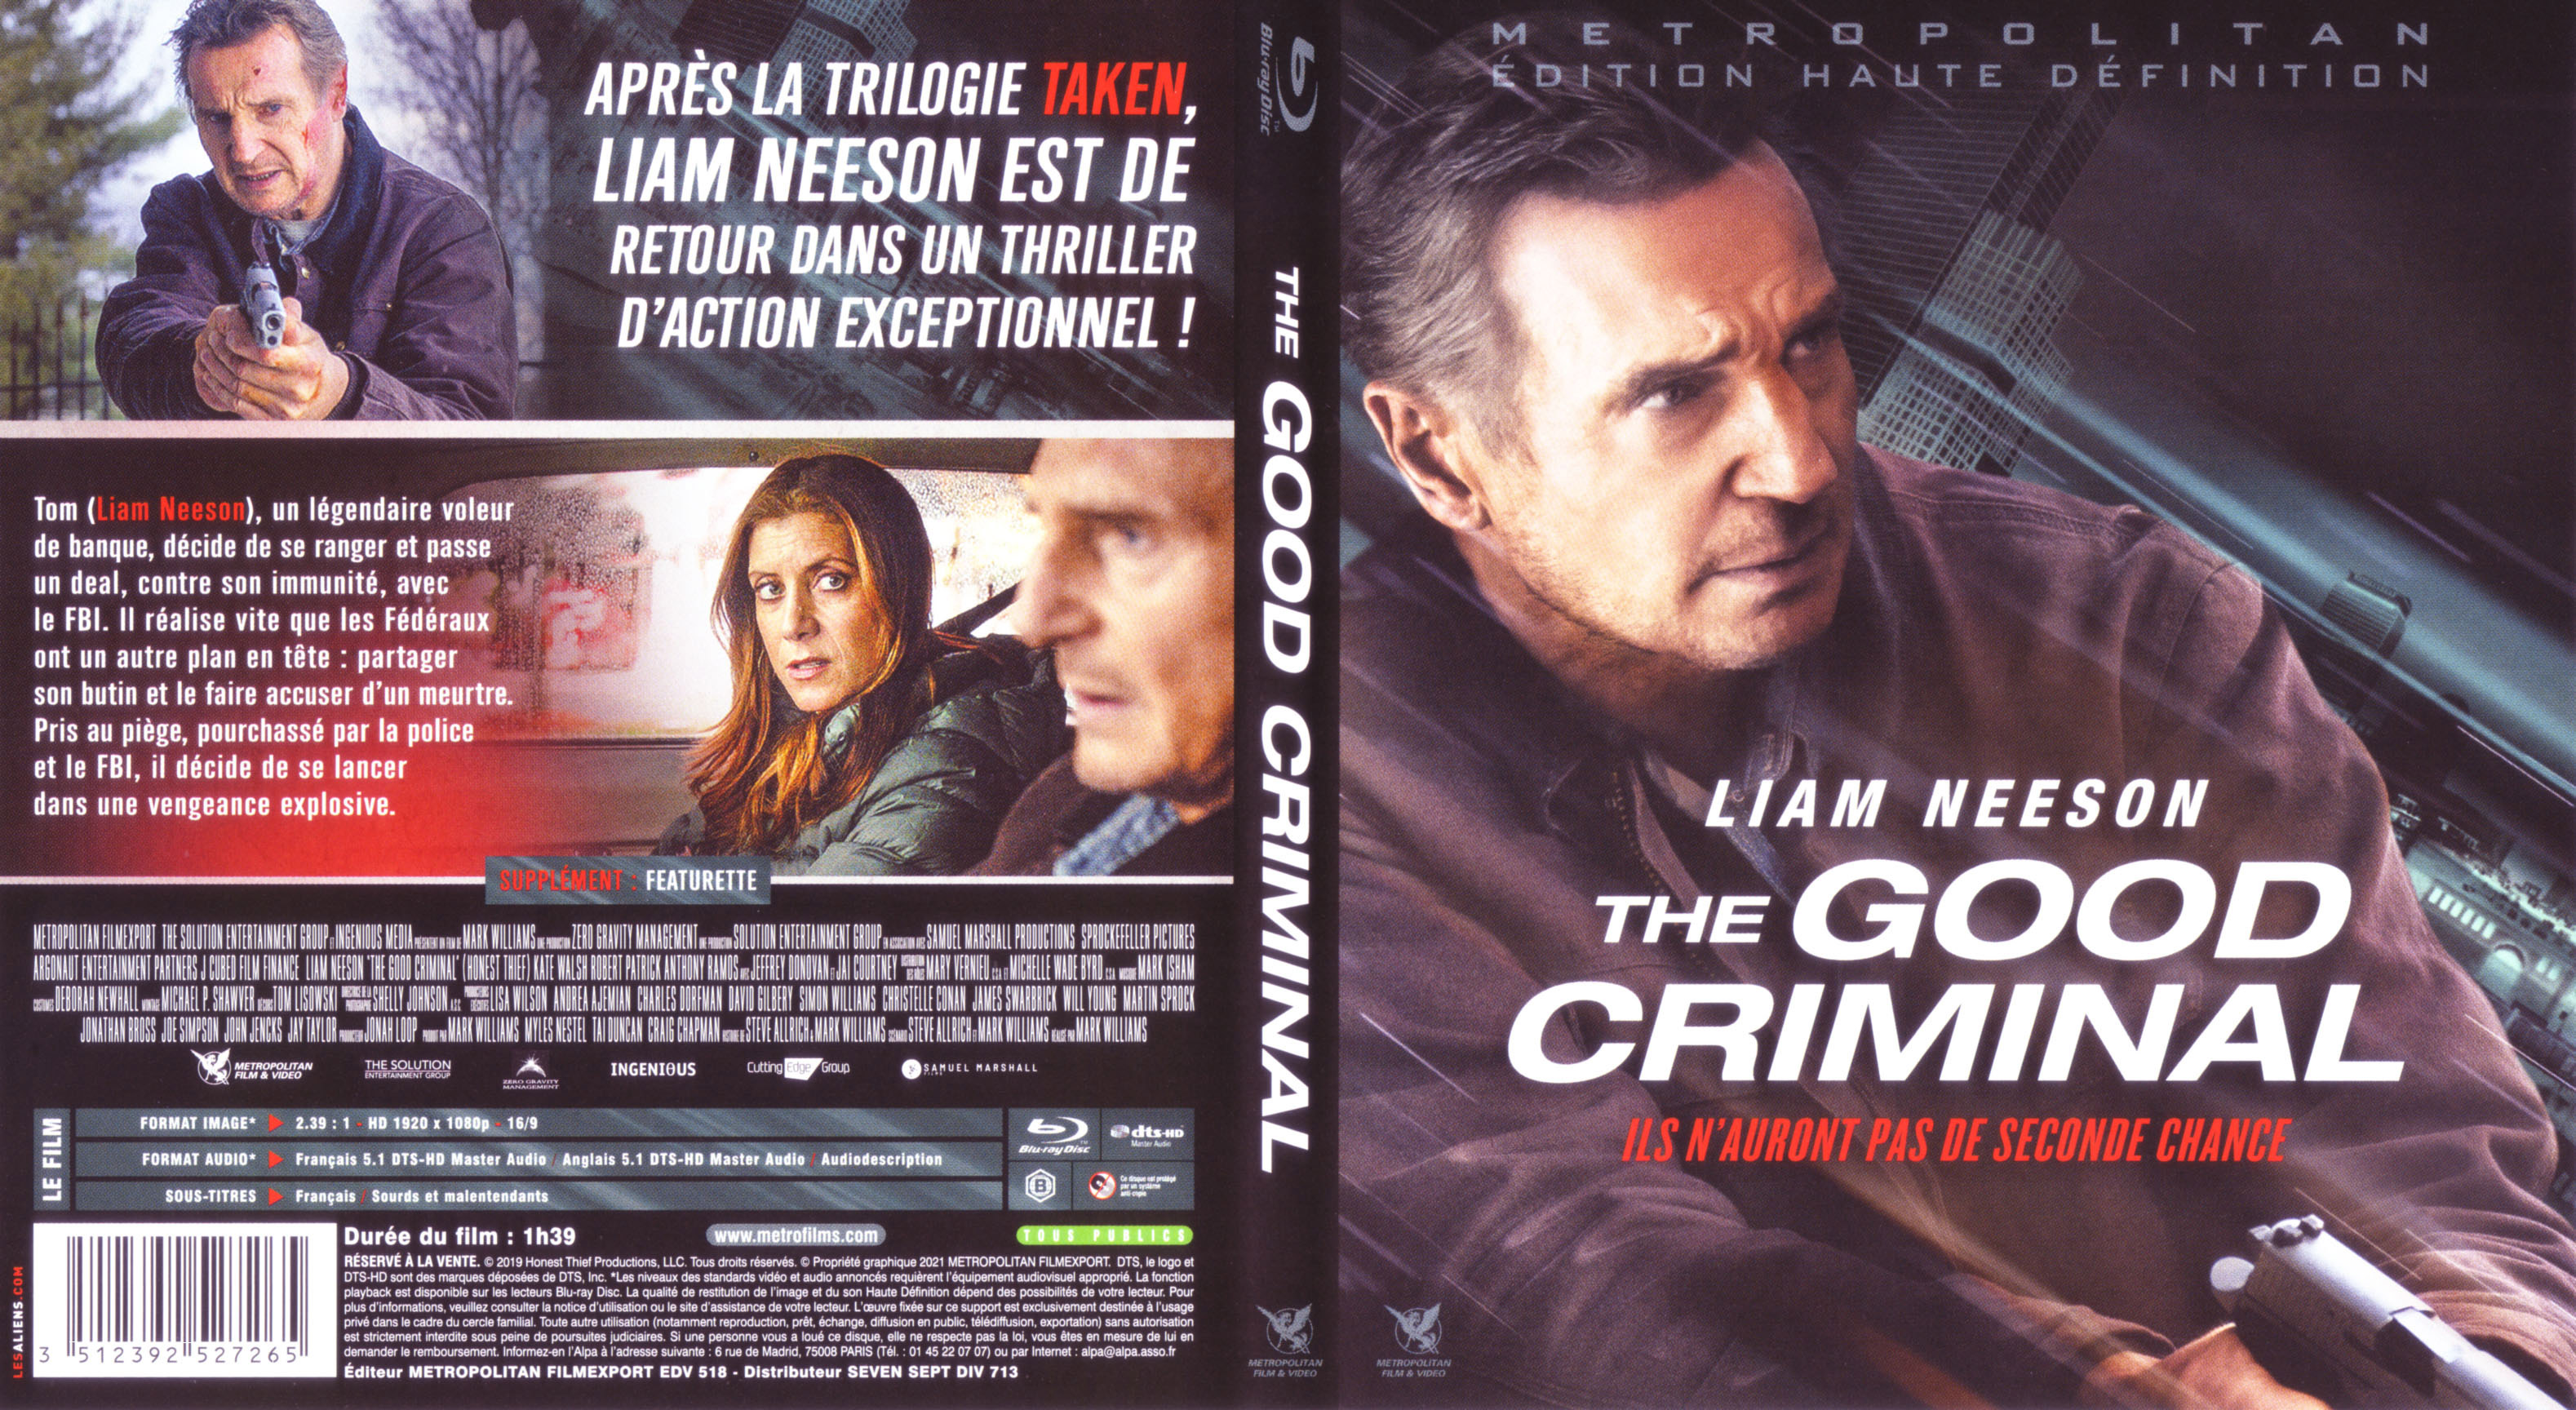 Jaquette DVD The good criminal (BLU-RAY)